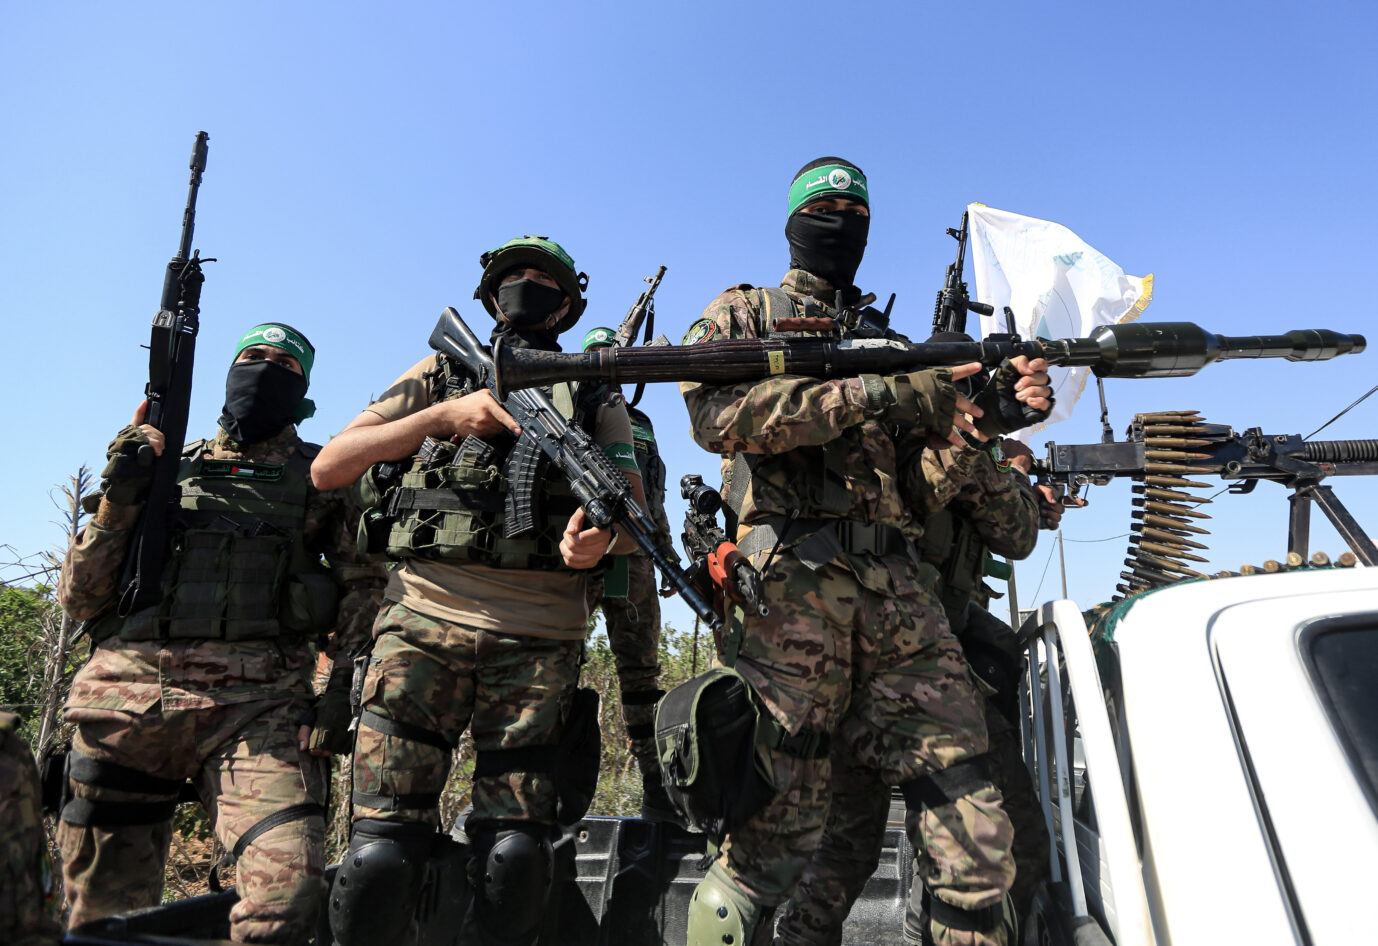 July 19, 2023, Gaza, Palestine: Palestinian fighters from the military wing of the Hamas movement seen on the back of a truck during a military parade near the border with Israel in the central Gaza Strip, during a commemoration of the 2014 war, the 51-day period of the Israeli-Palestinian conflict. (Credit Image: © Yousef Masoud/SOPA Images via ZUMA Press Wire